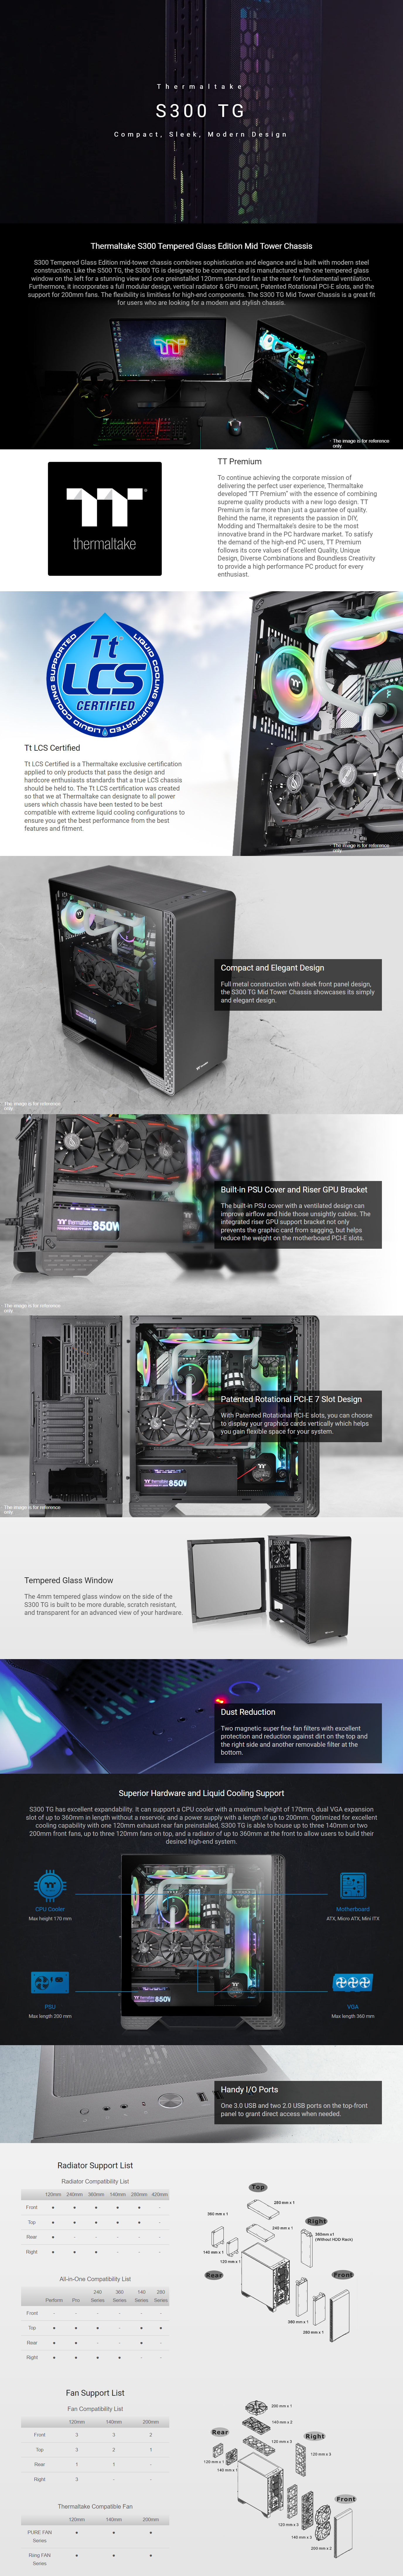 Thermaltake-Cases-Thermaltake-S300-Tempered-Glass-Mid-Tower-Case-Black-Edition-1